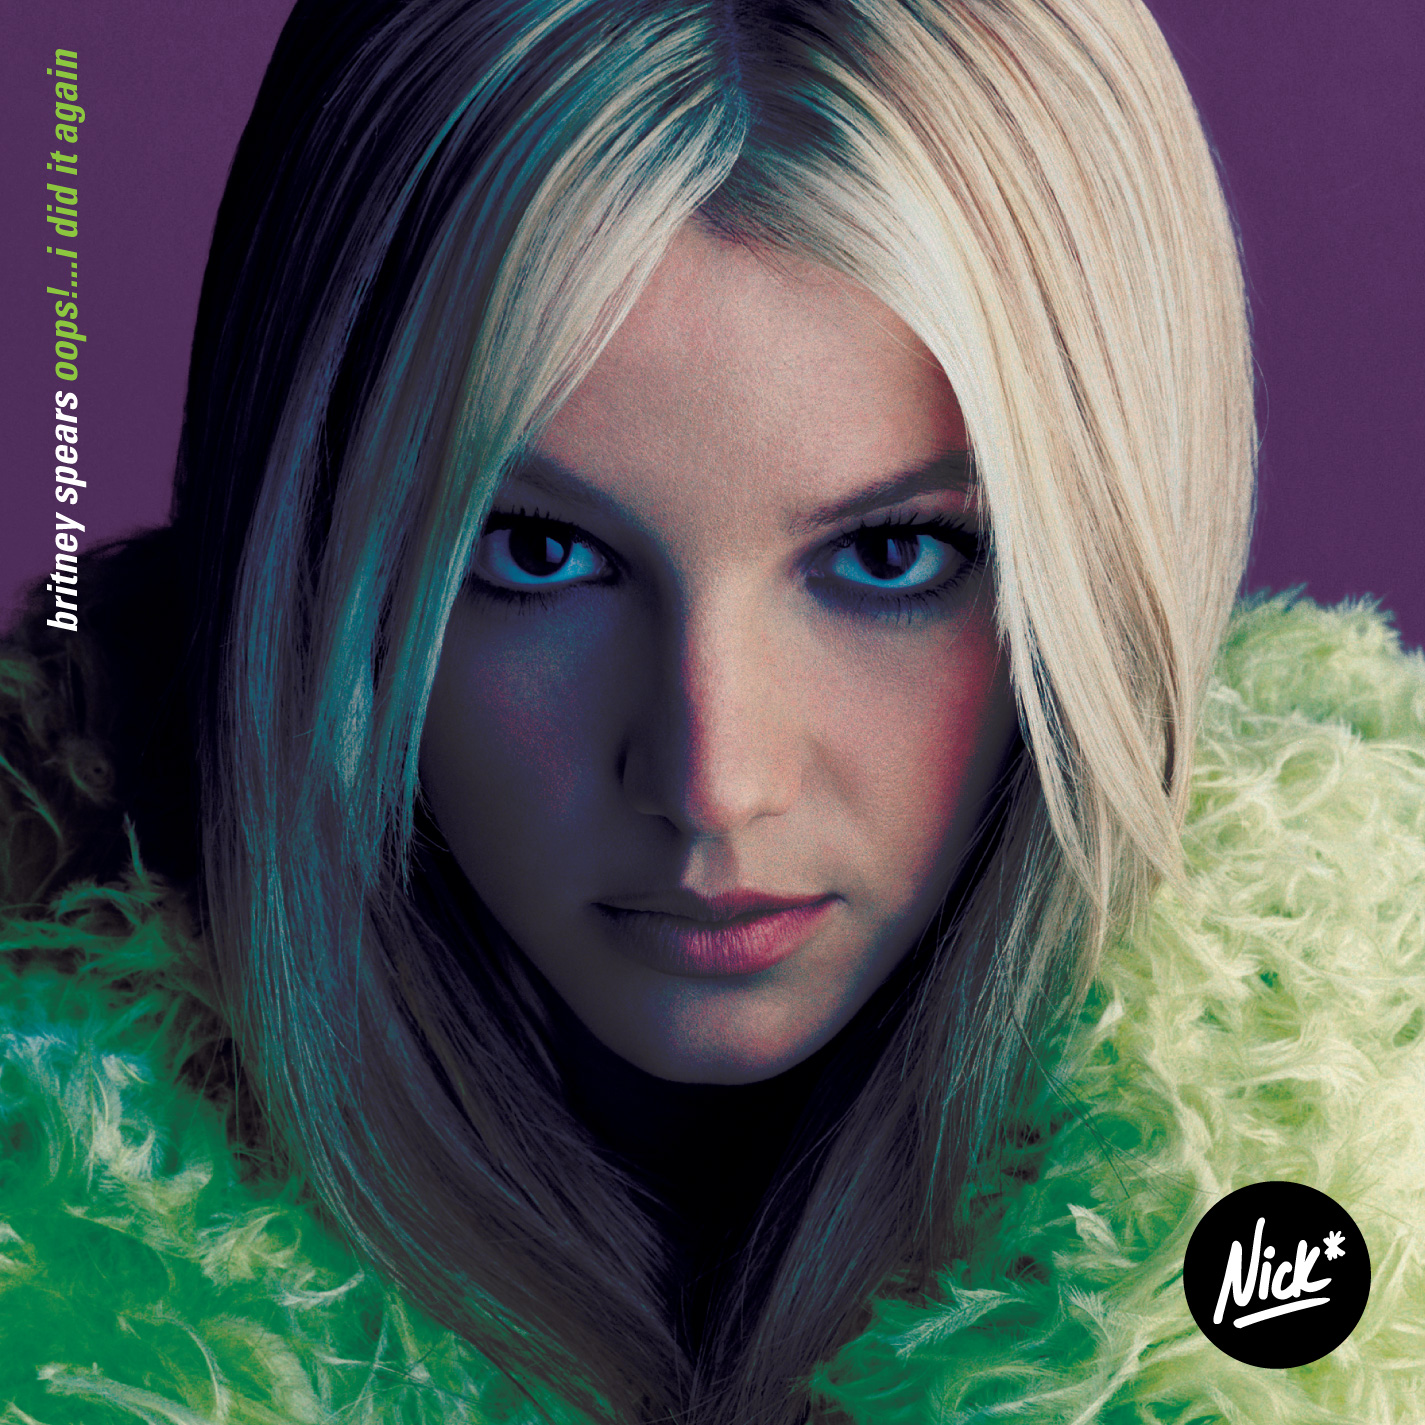 Britney Spears - Oops!...I Did It Again Nick* Remix